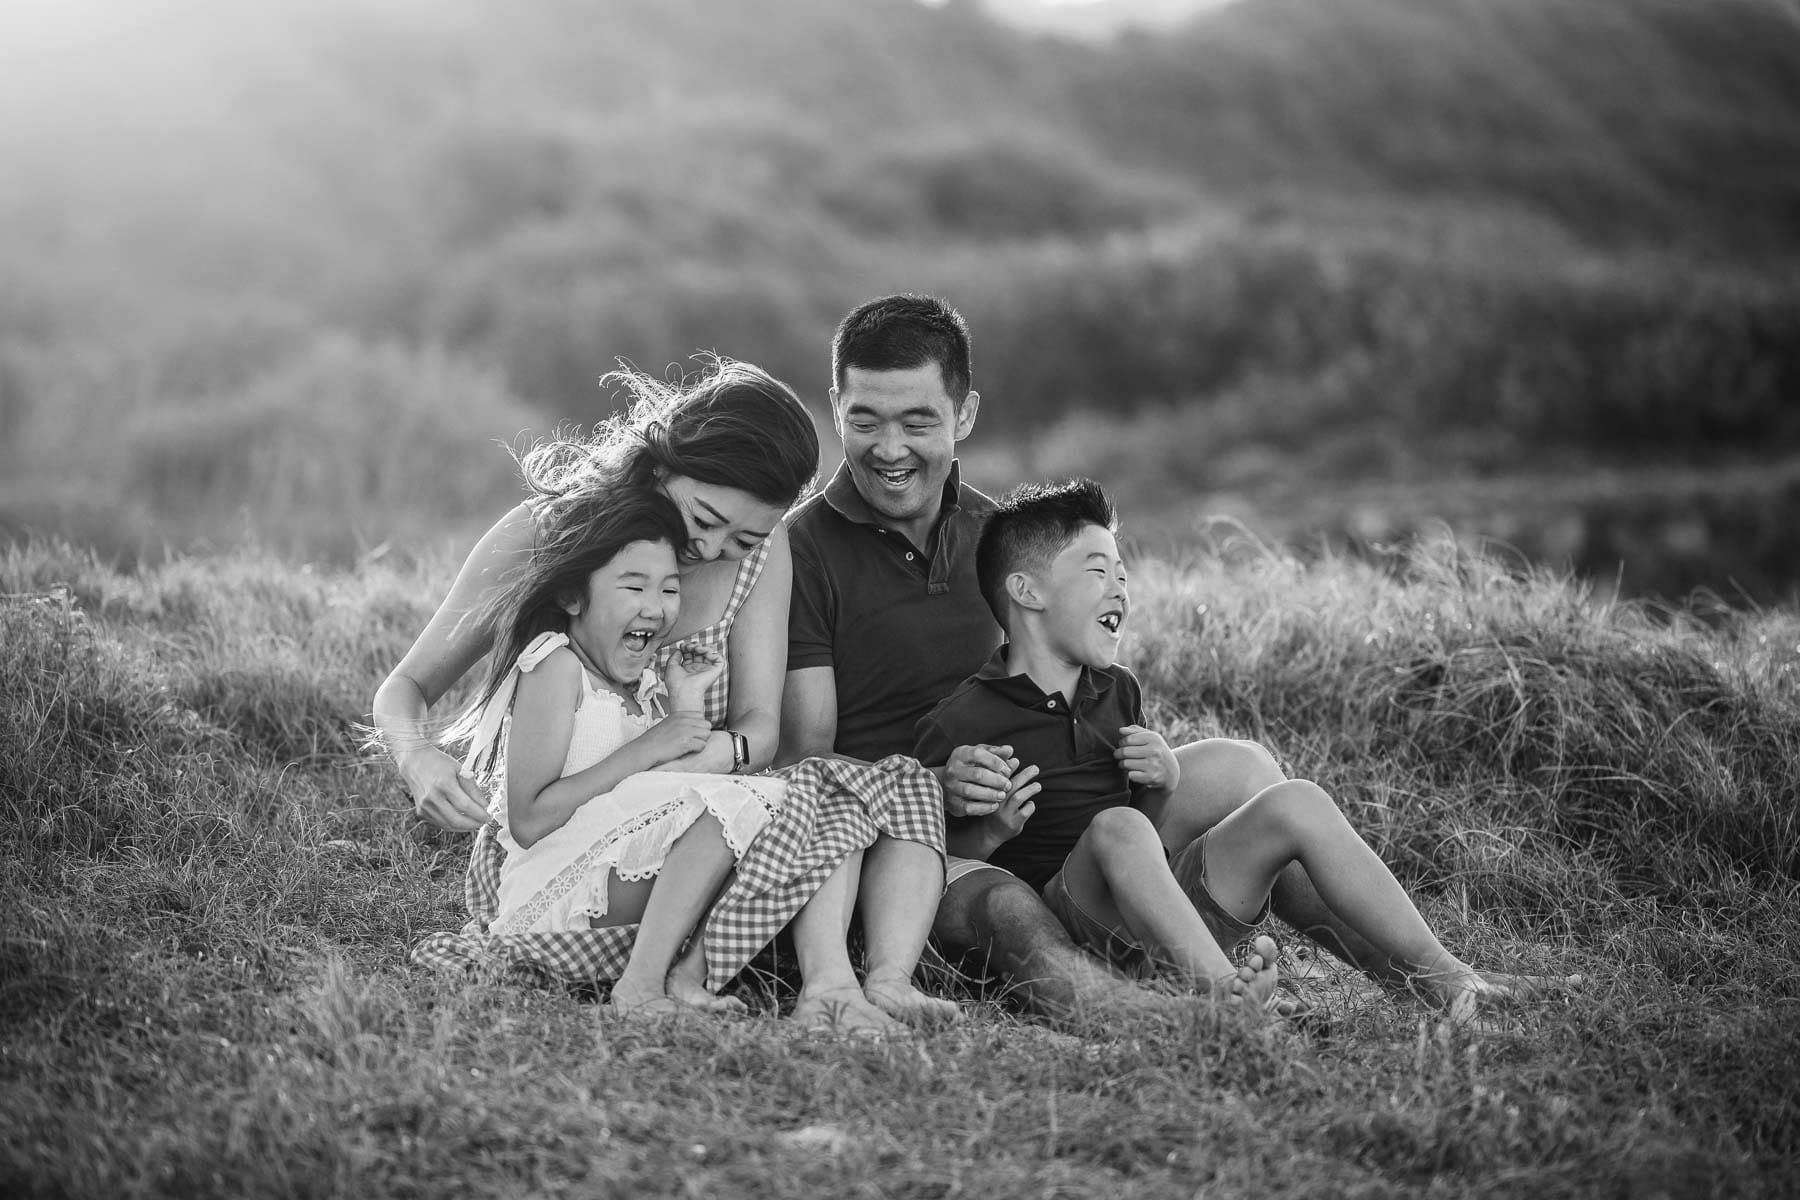 A family photo session with kids and their parents sitting on a Sydney beach at sunset